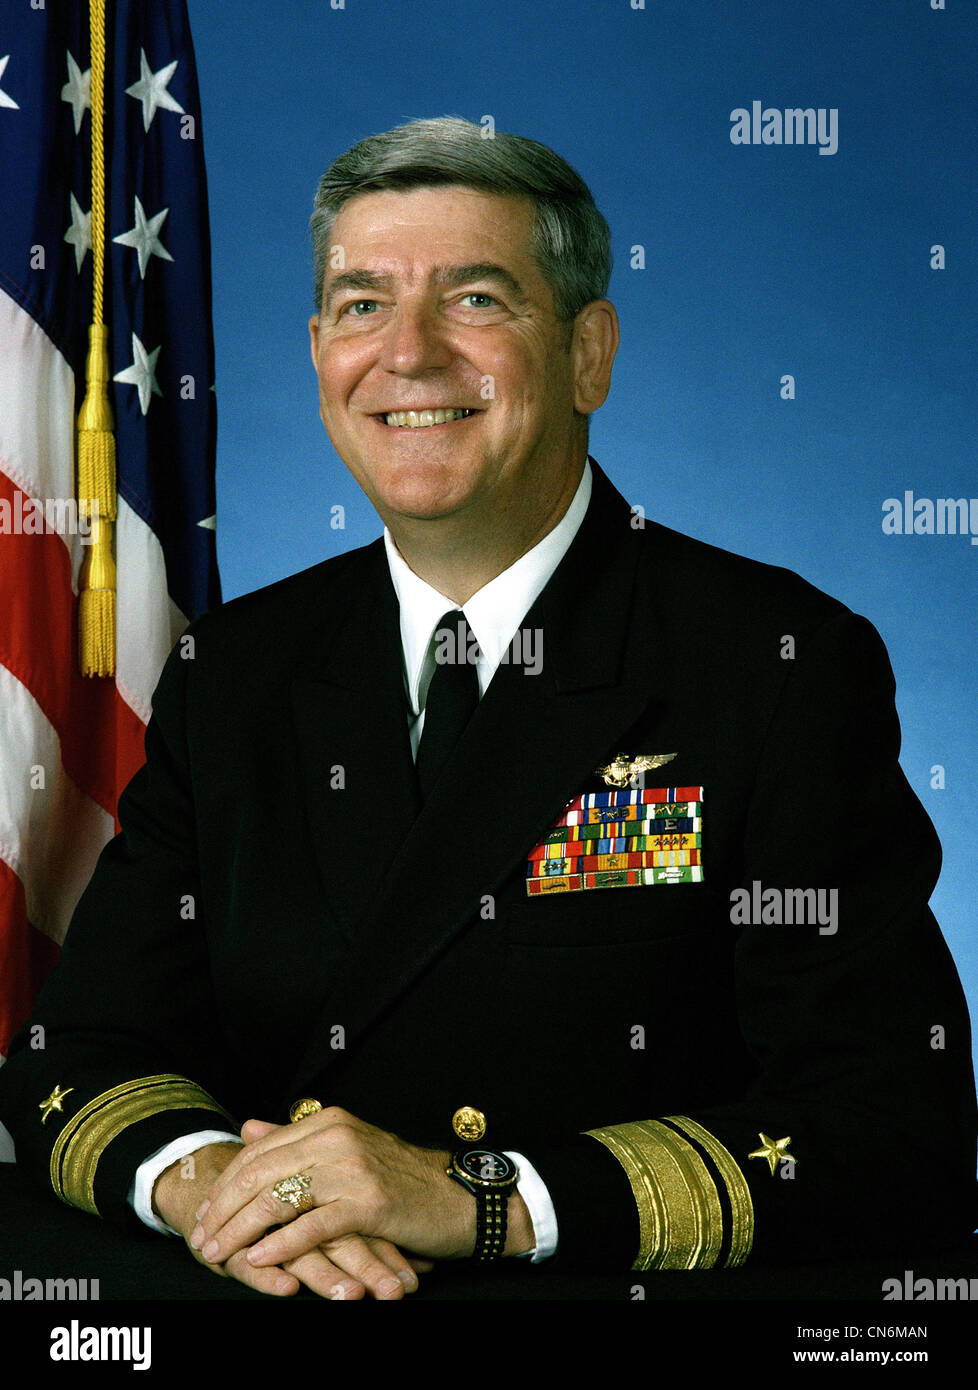 Rear Admiral Jeremy D. Taylor, USN (uncovered) Stock Photo